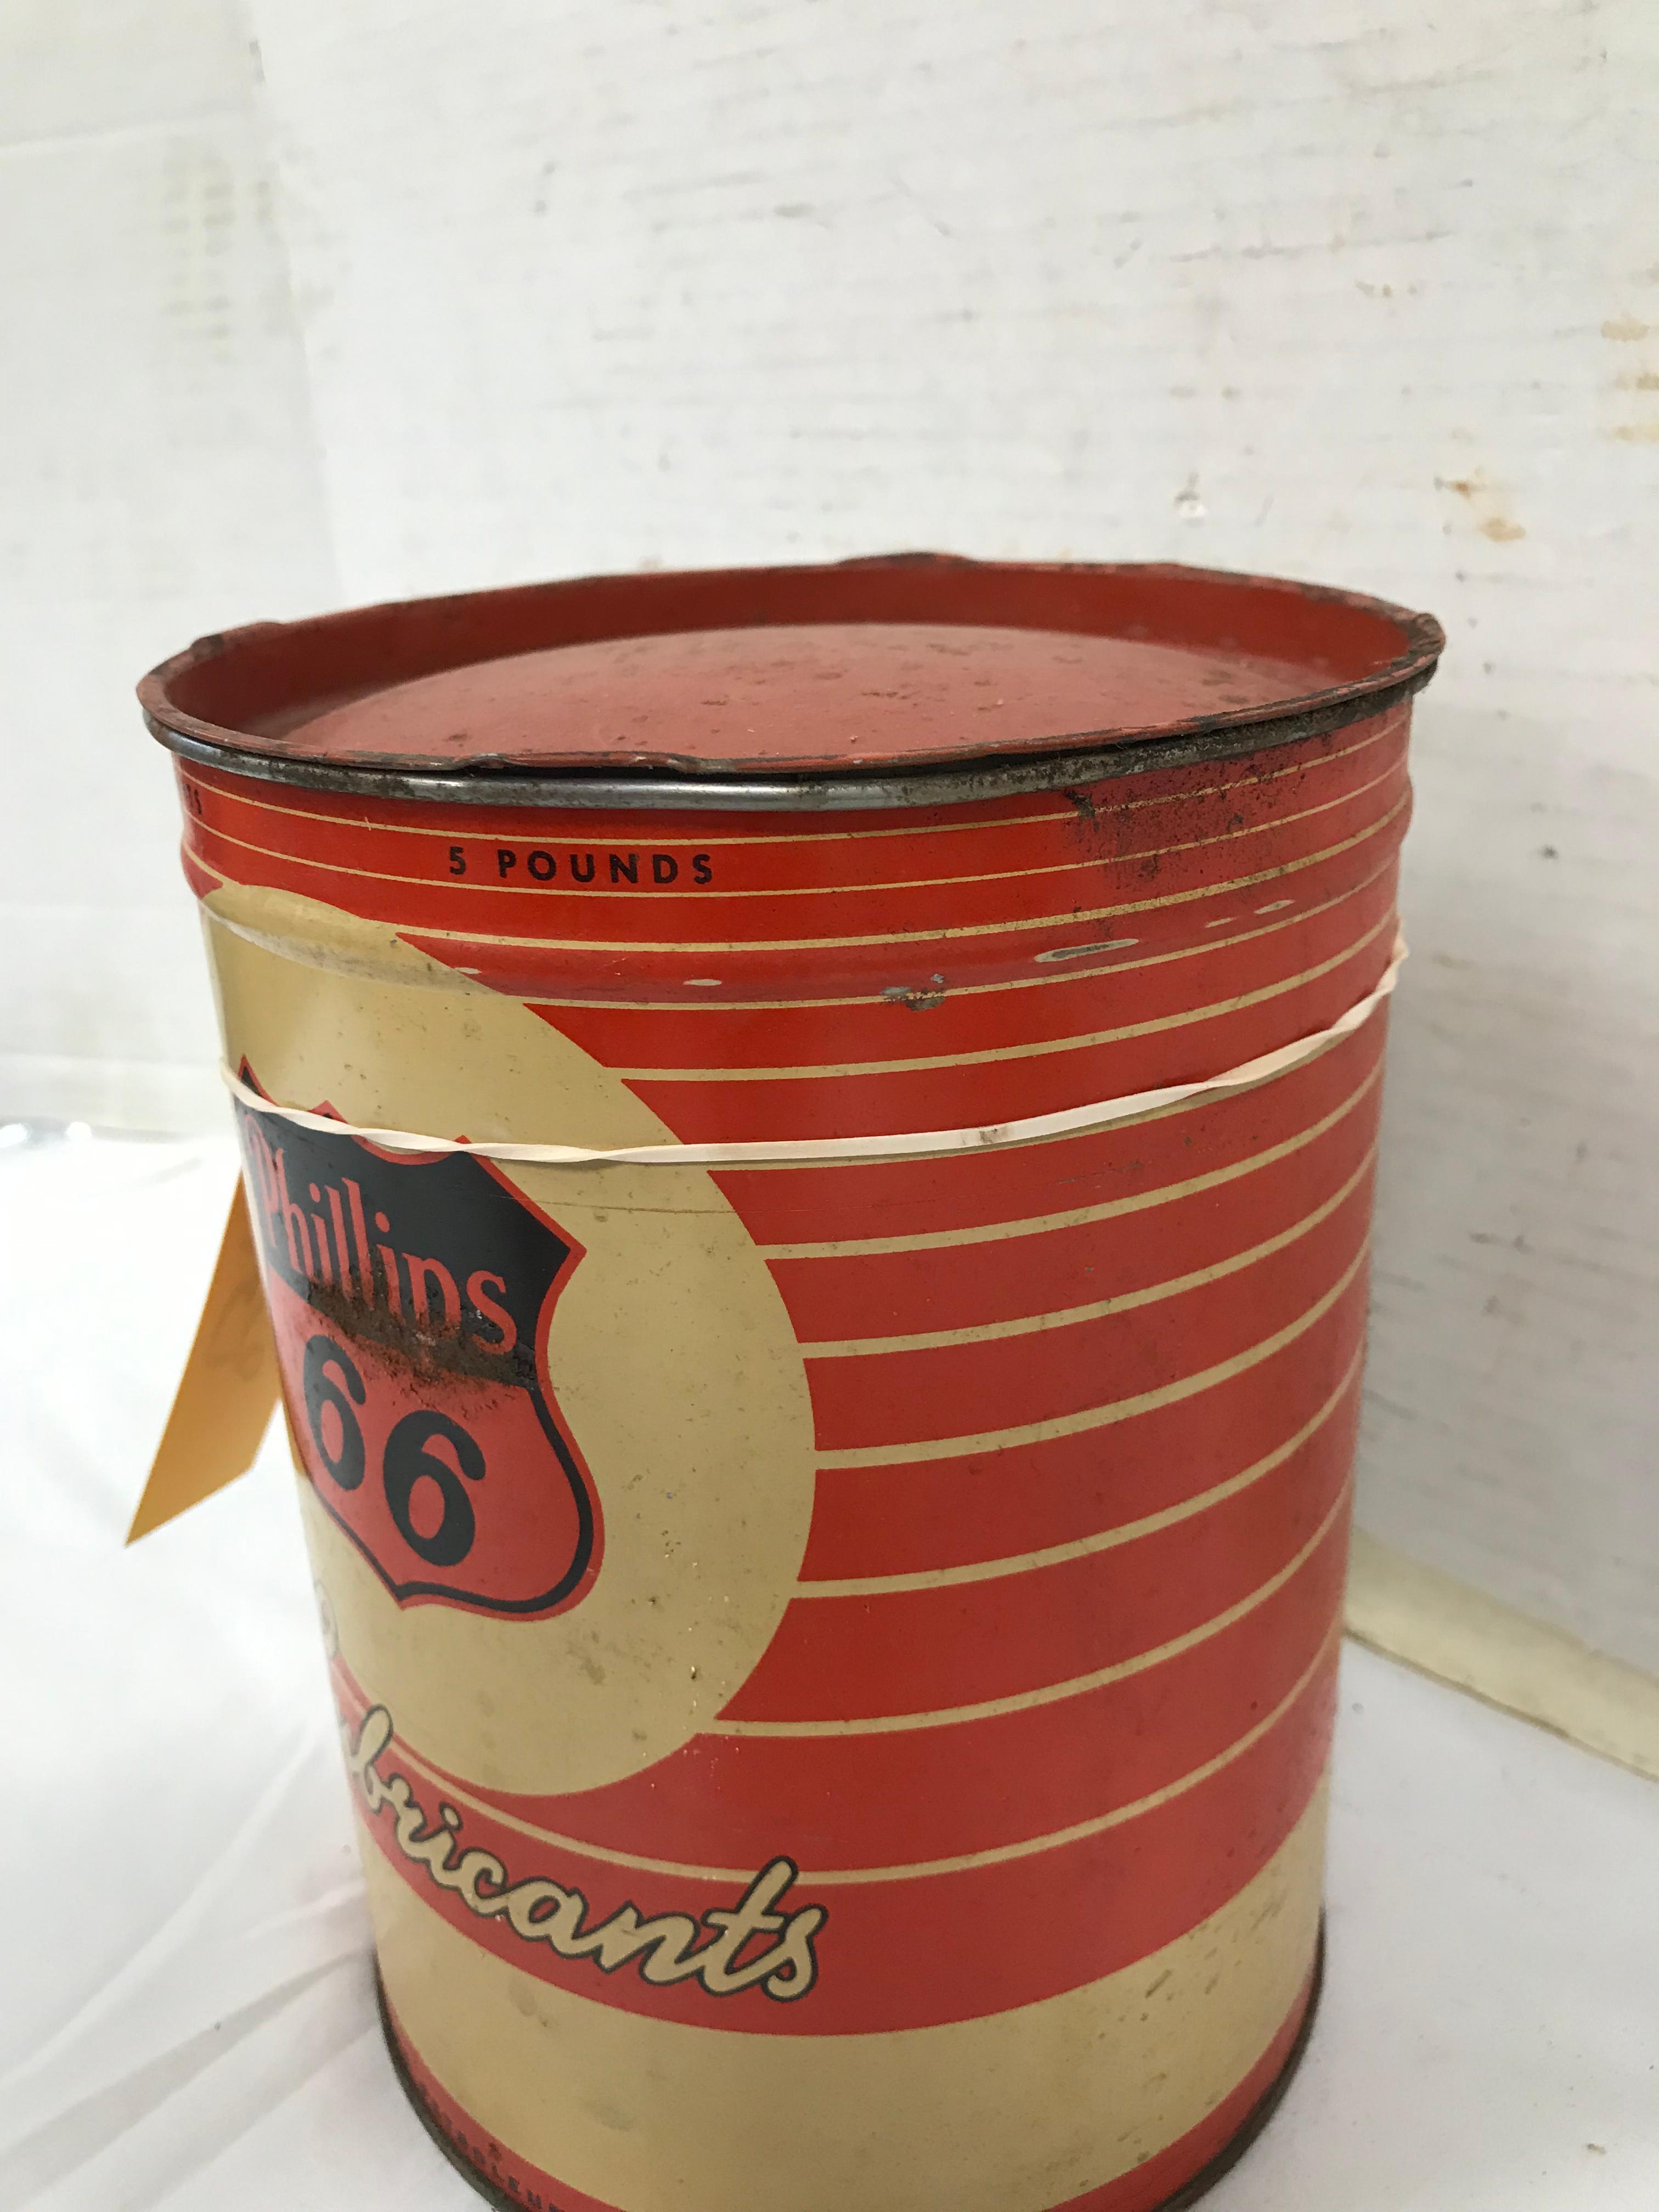 5 POUND PHILLIPS 66 GREASE CAN